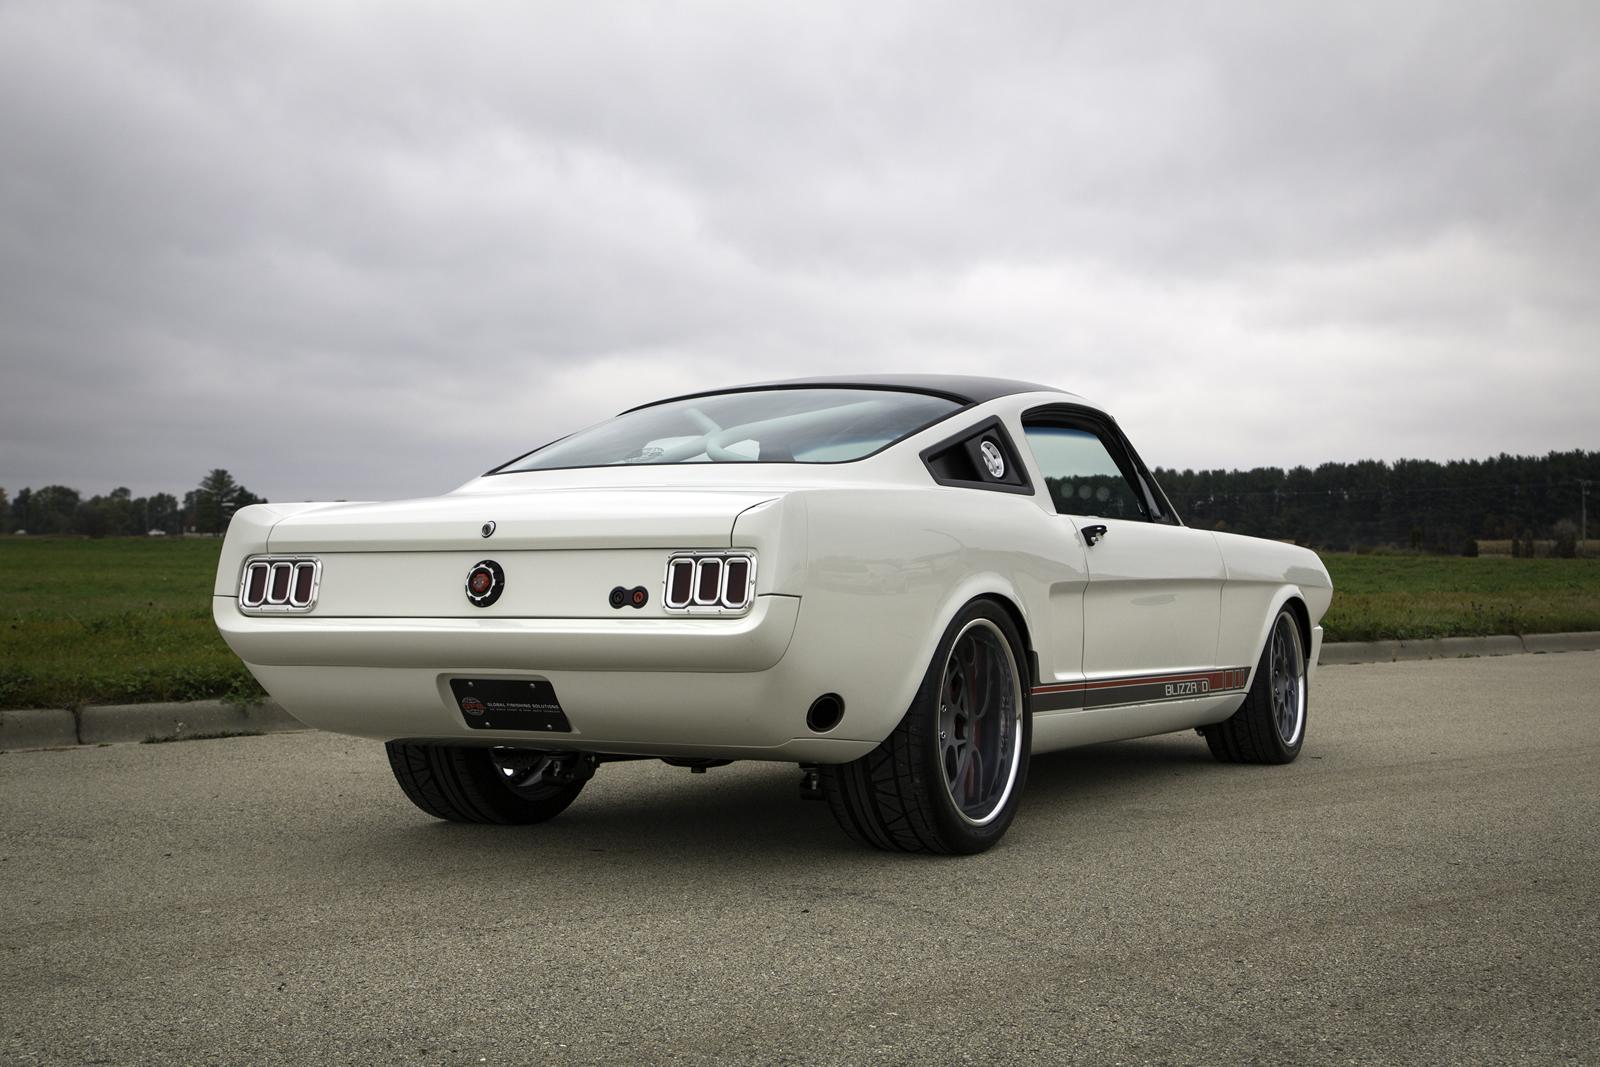 Ringbrothers Ford Mustang Blizzard picture 4 of 9, MY 2013, size:1600x1067.